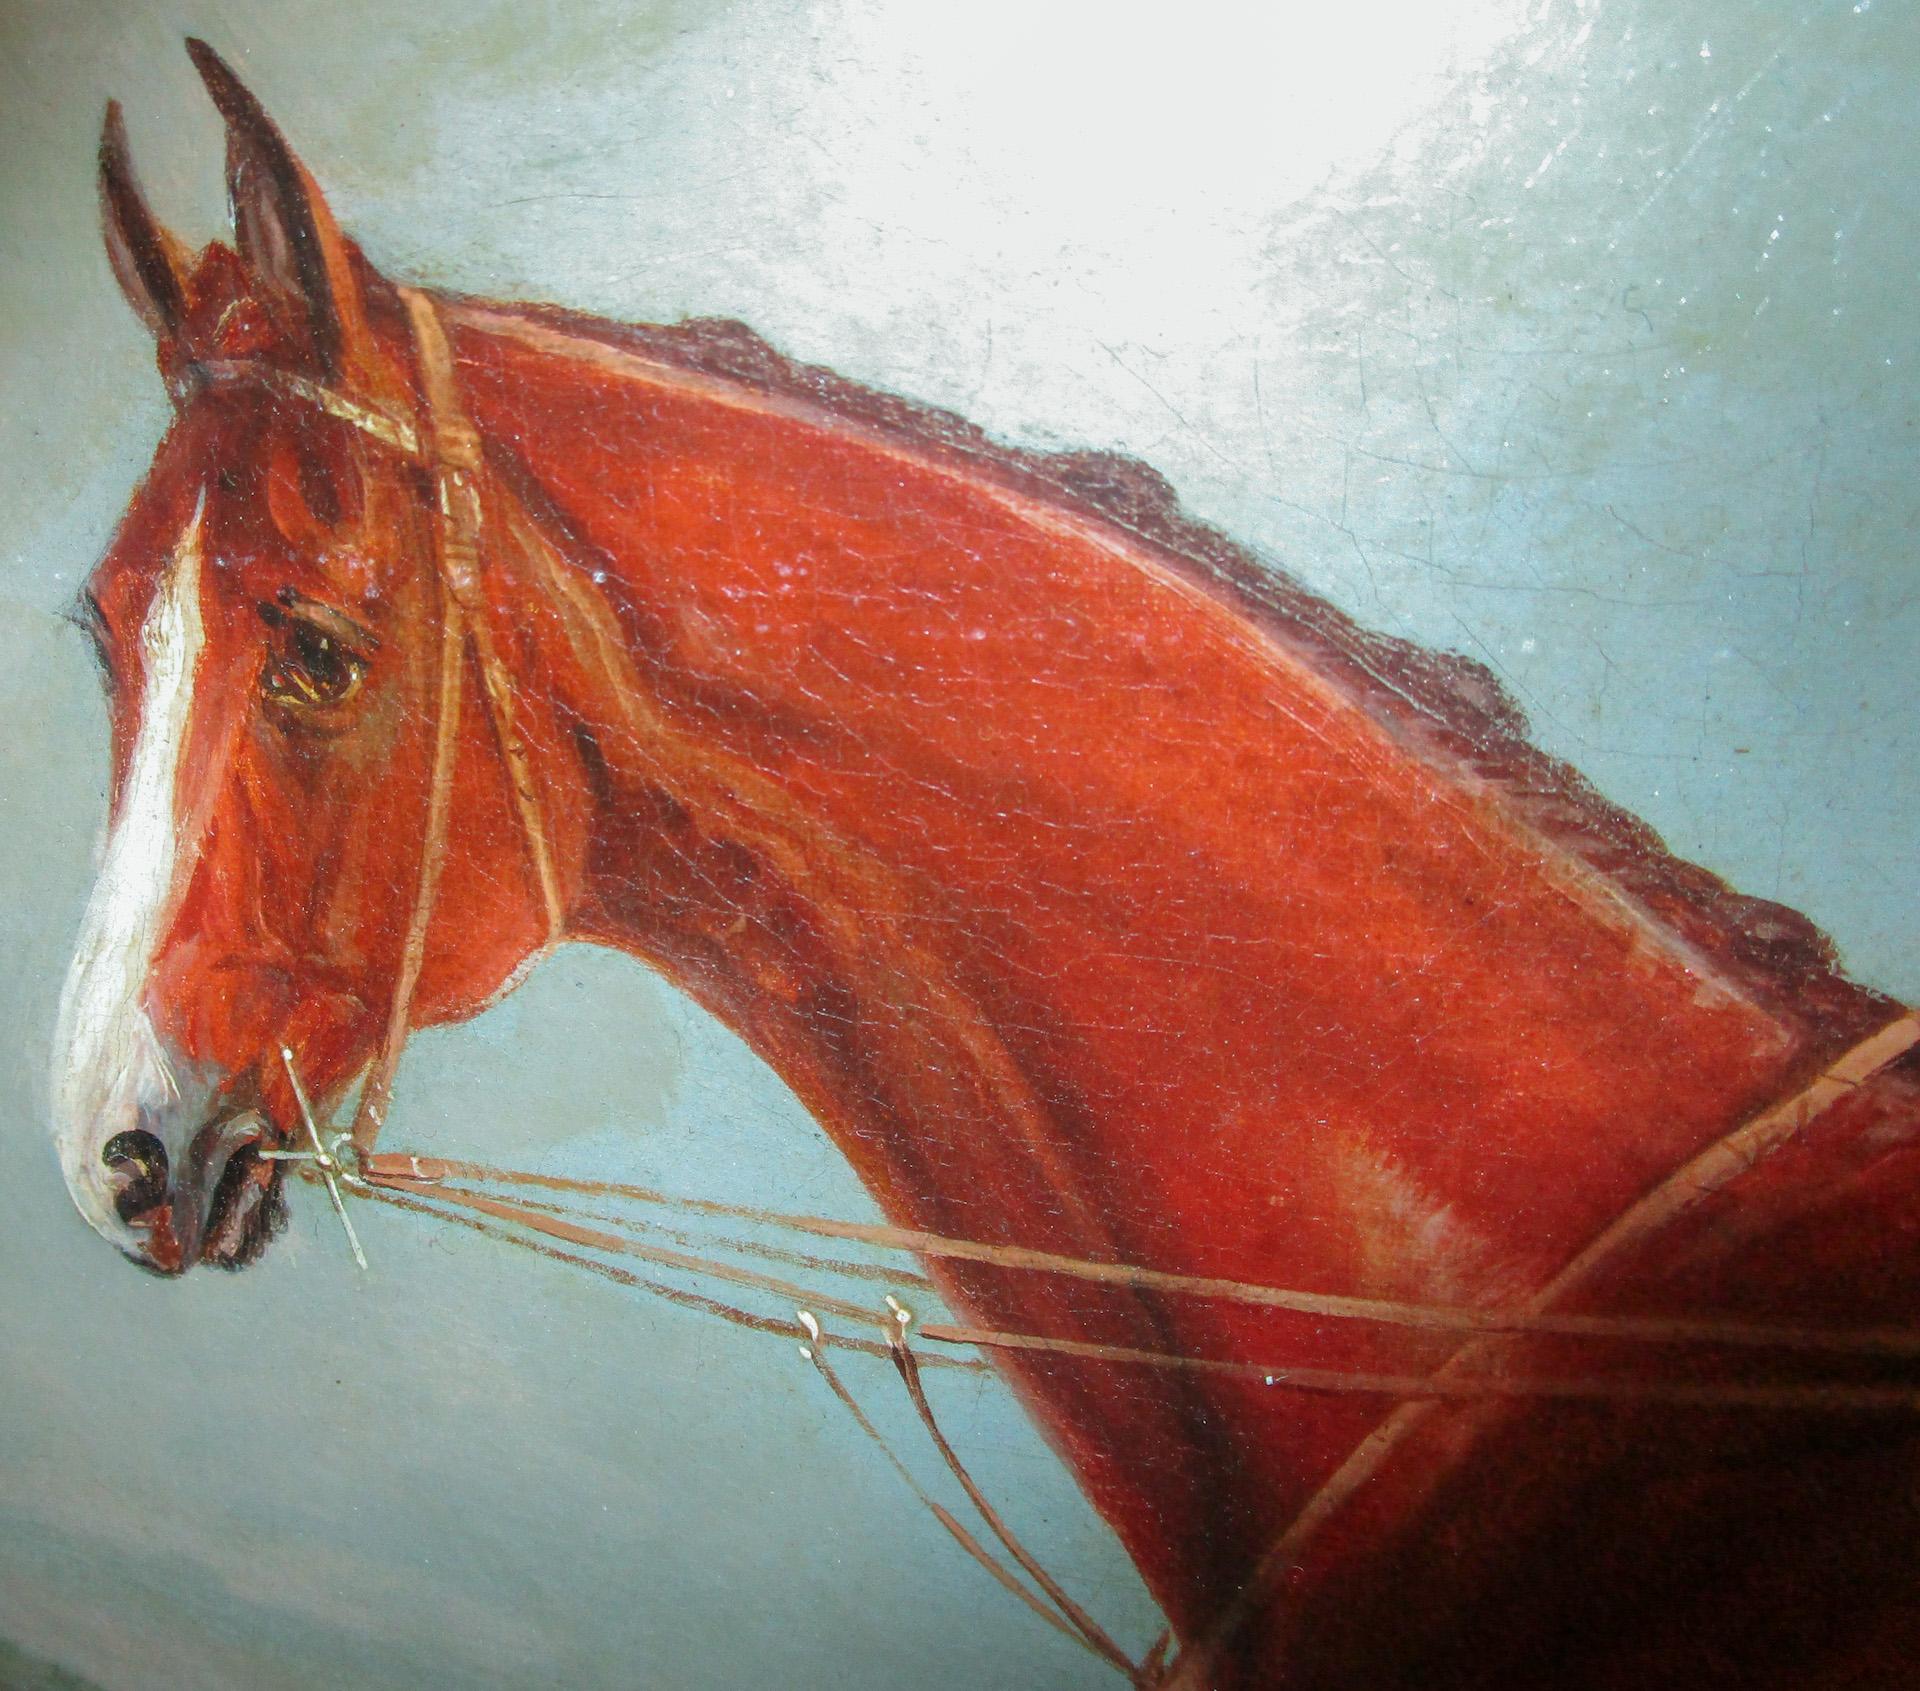 Mid-19th Century English Racehorse Oil Painting by F. C. Turner 1839 Harkaway Winner Goodwood Cup